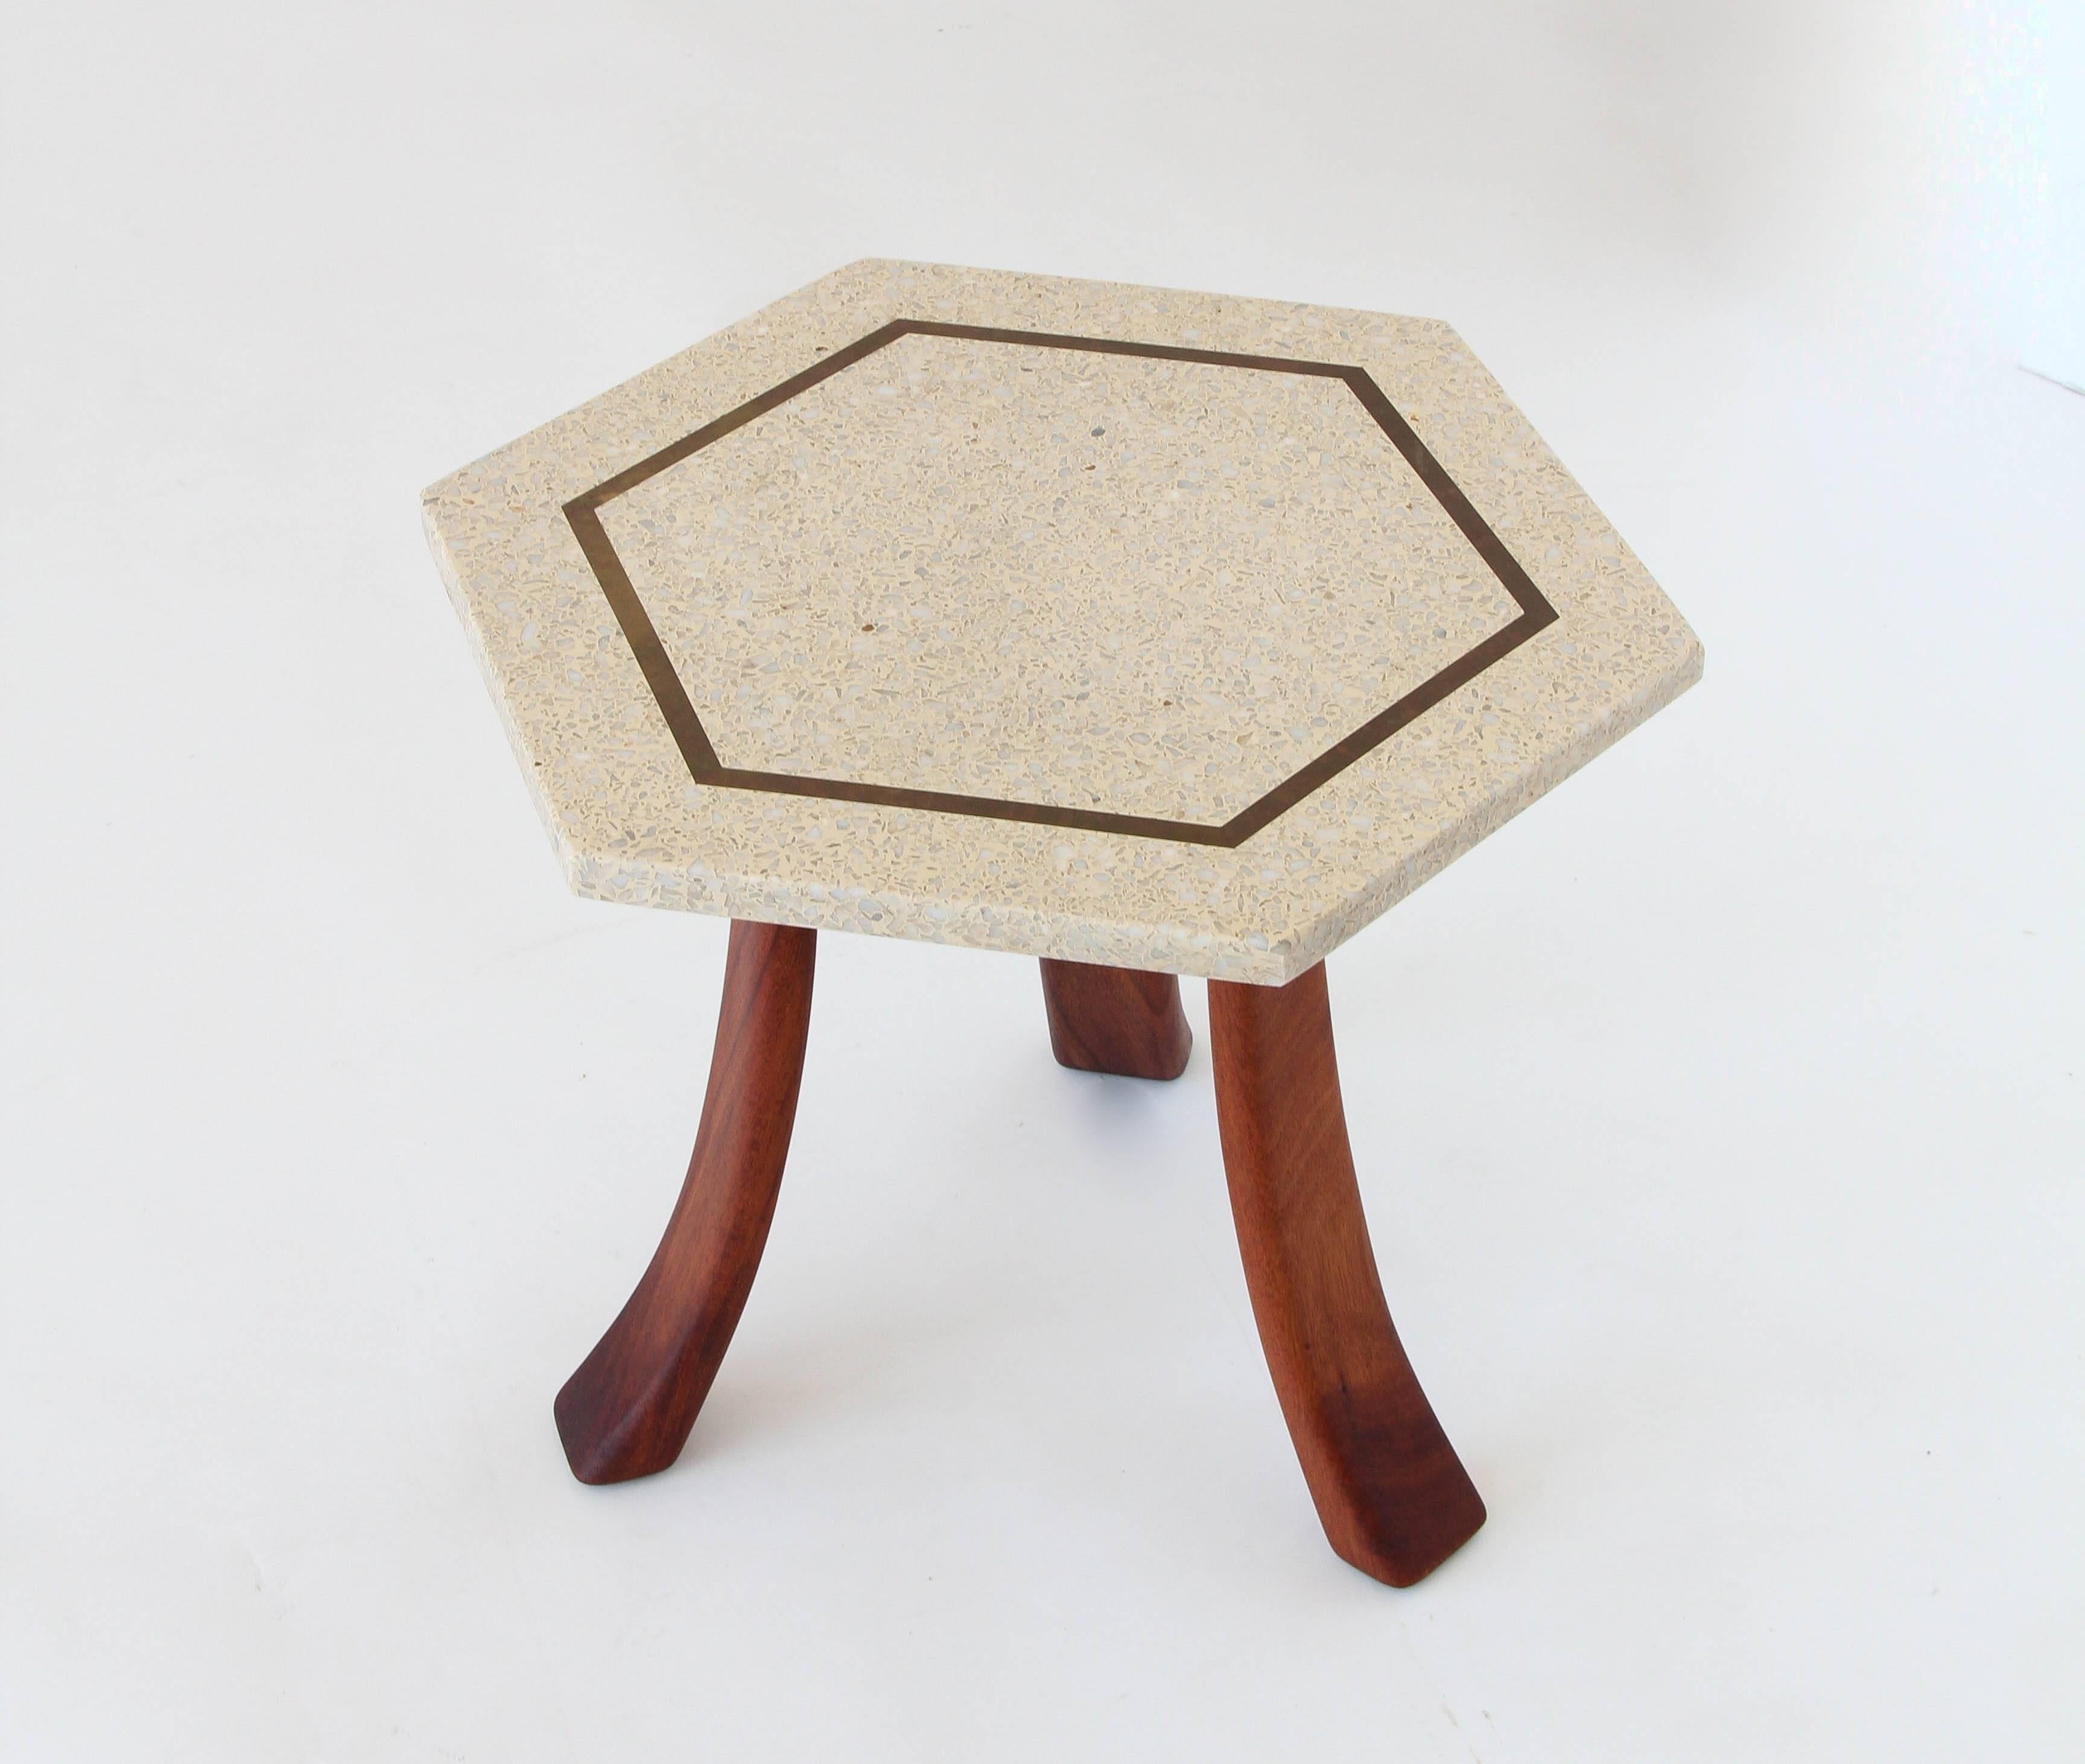 A distinctive side table with a hexagonal top and flared sabre legs by Harvey Probber. The tabletop is in a white terrazzo with an inset hexagon detail in brass. The flared legs are solid walnut. 

Condition: Excellent vintage condition;